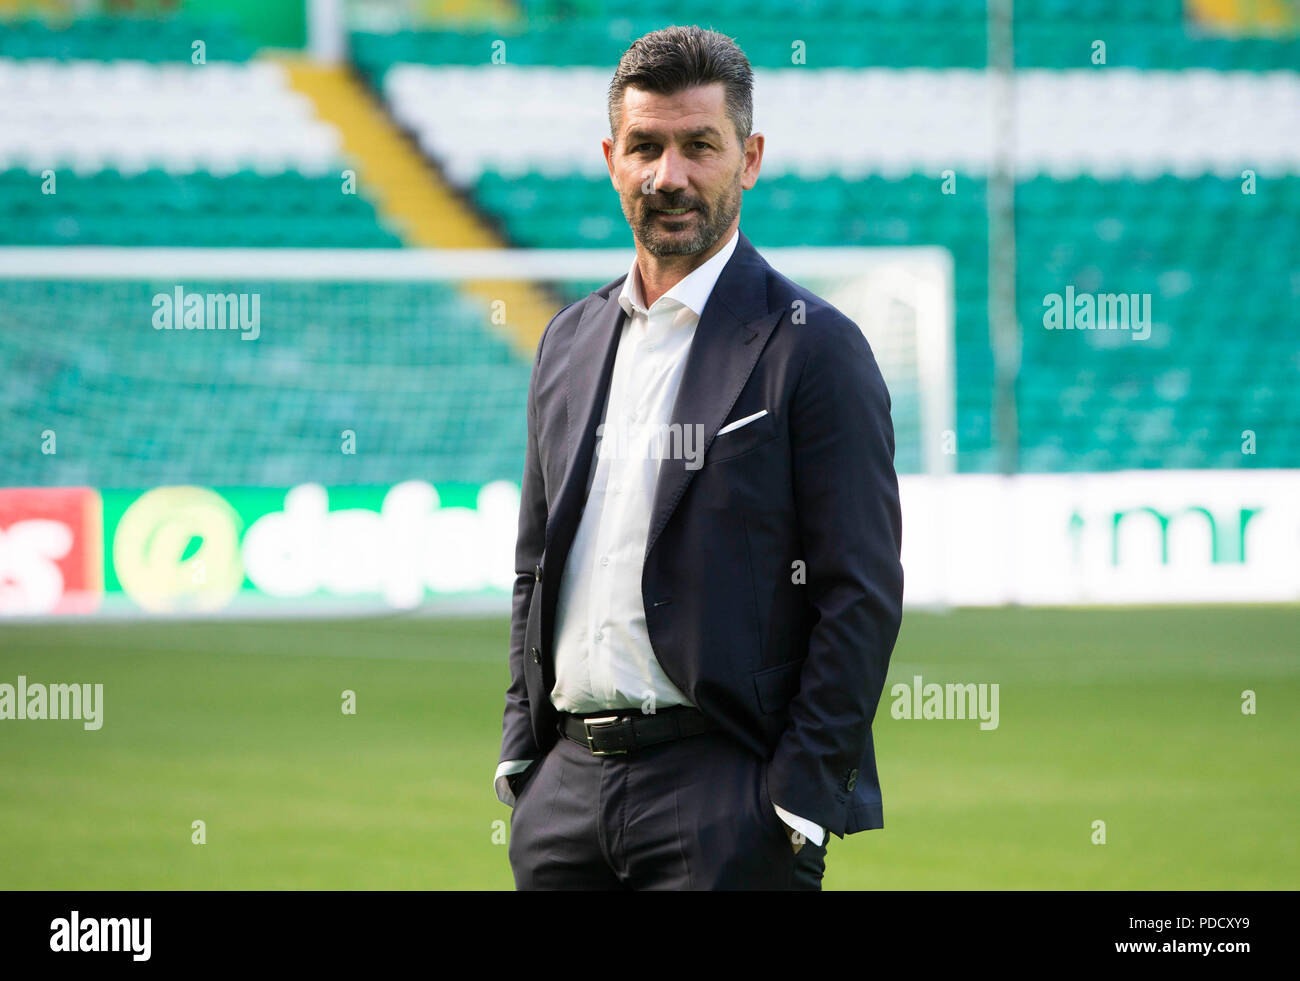 Aek athens manager hi-res stock photography and images - Alamy